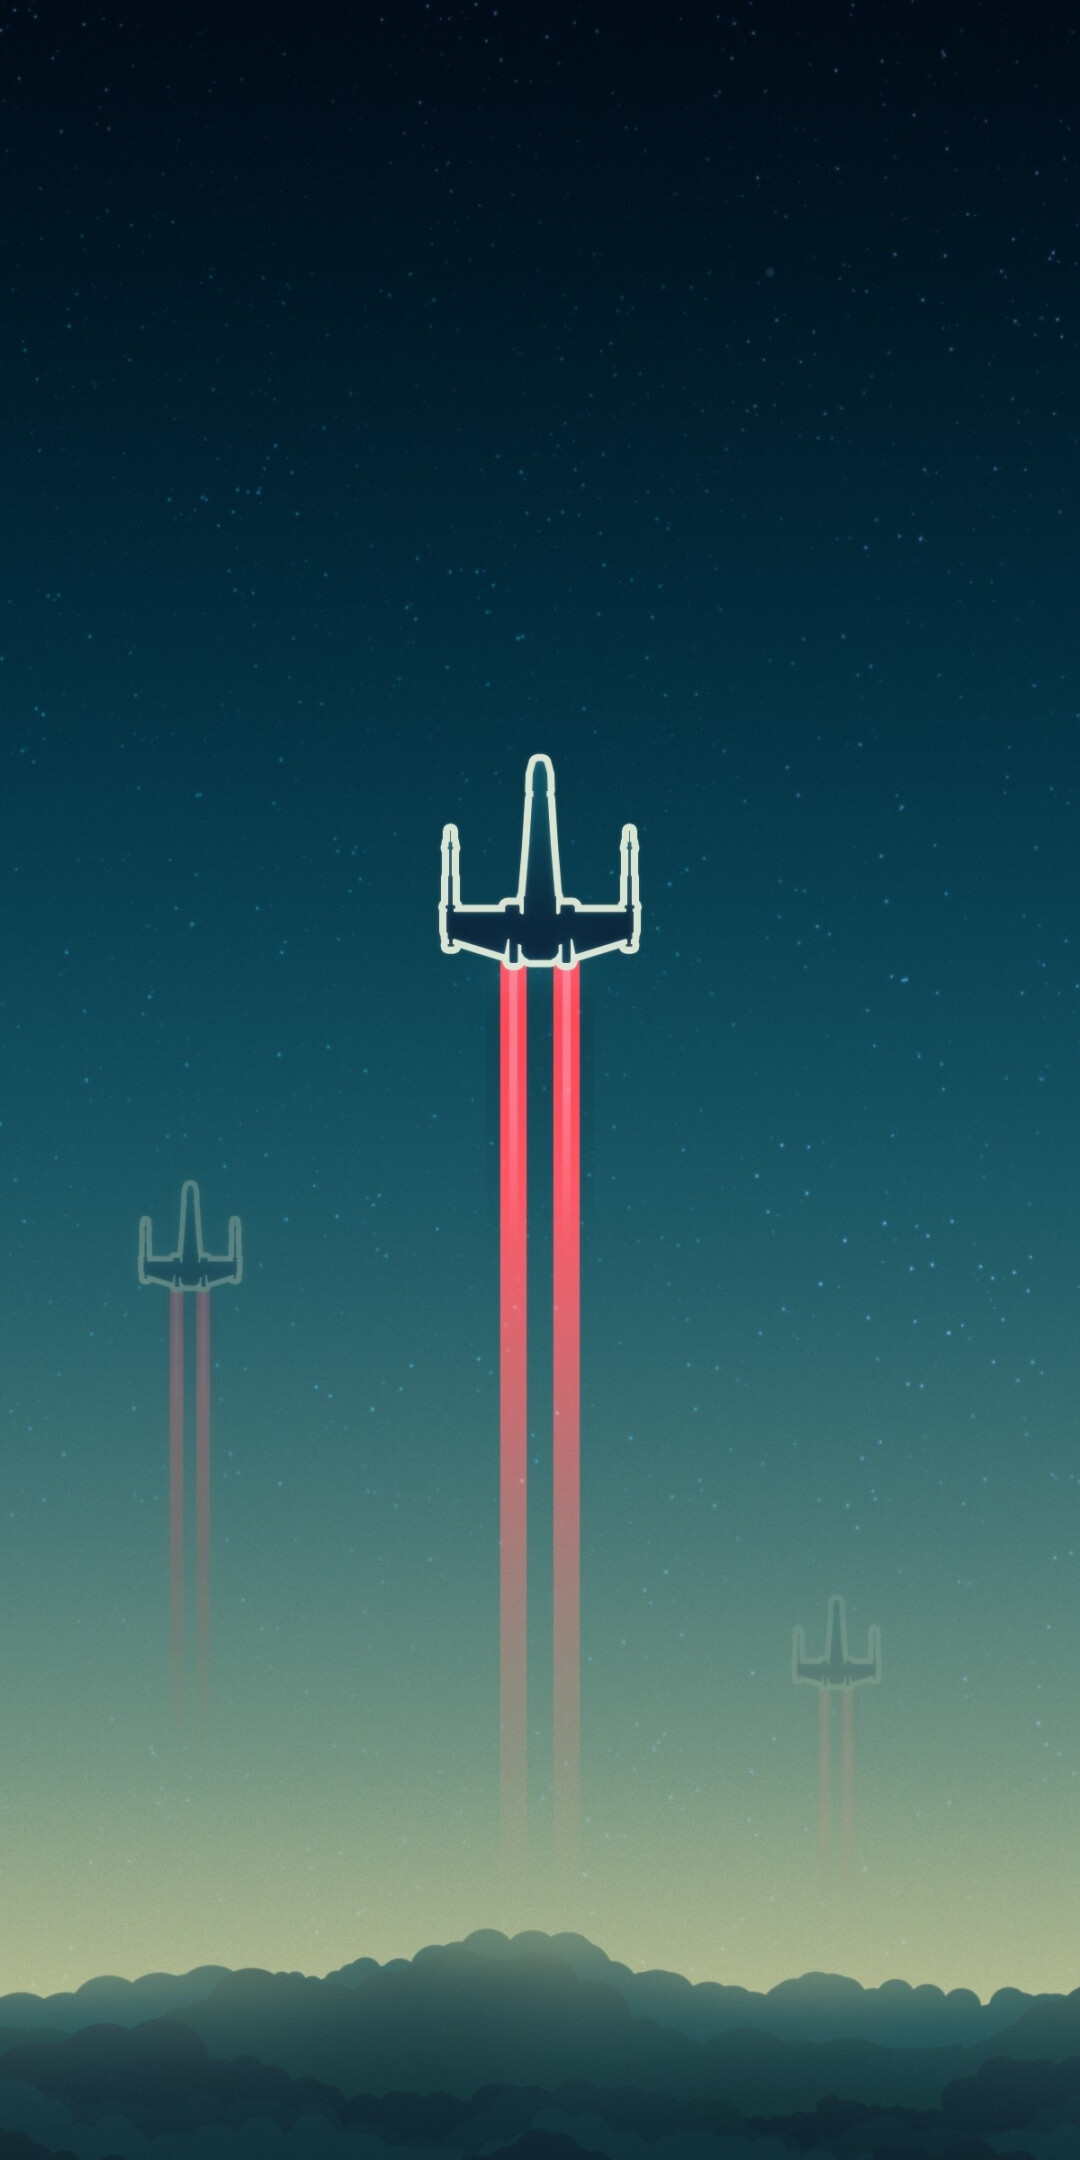 Star Wars: Starfighter, A 2001 action video game, developed and published by LucasArts. 1080x2160 HD Background.